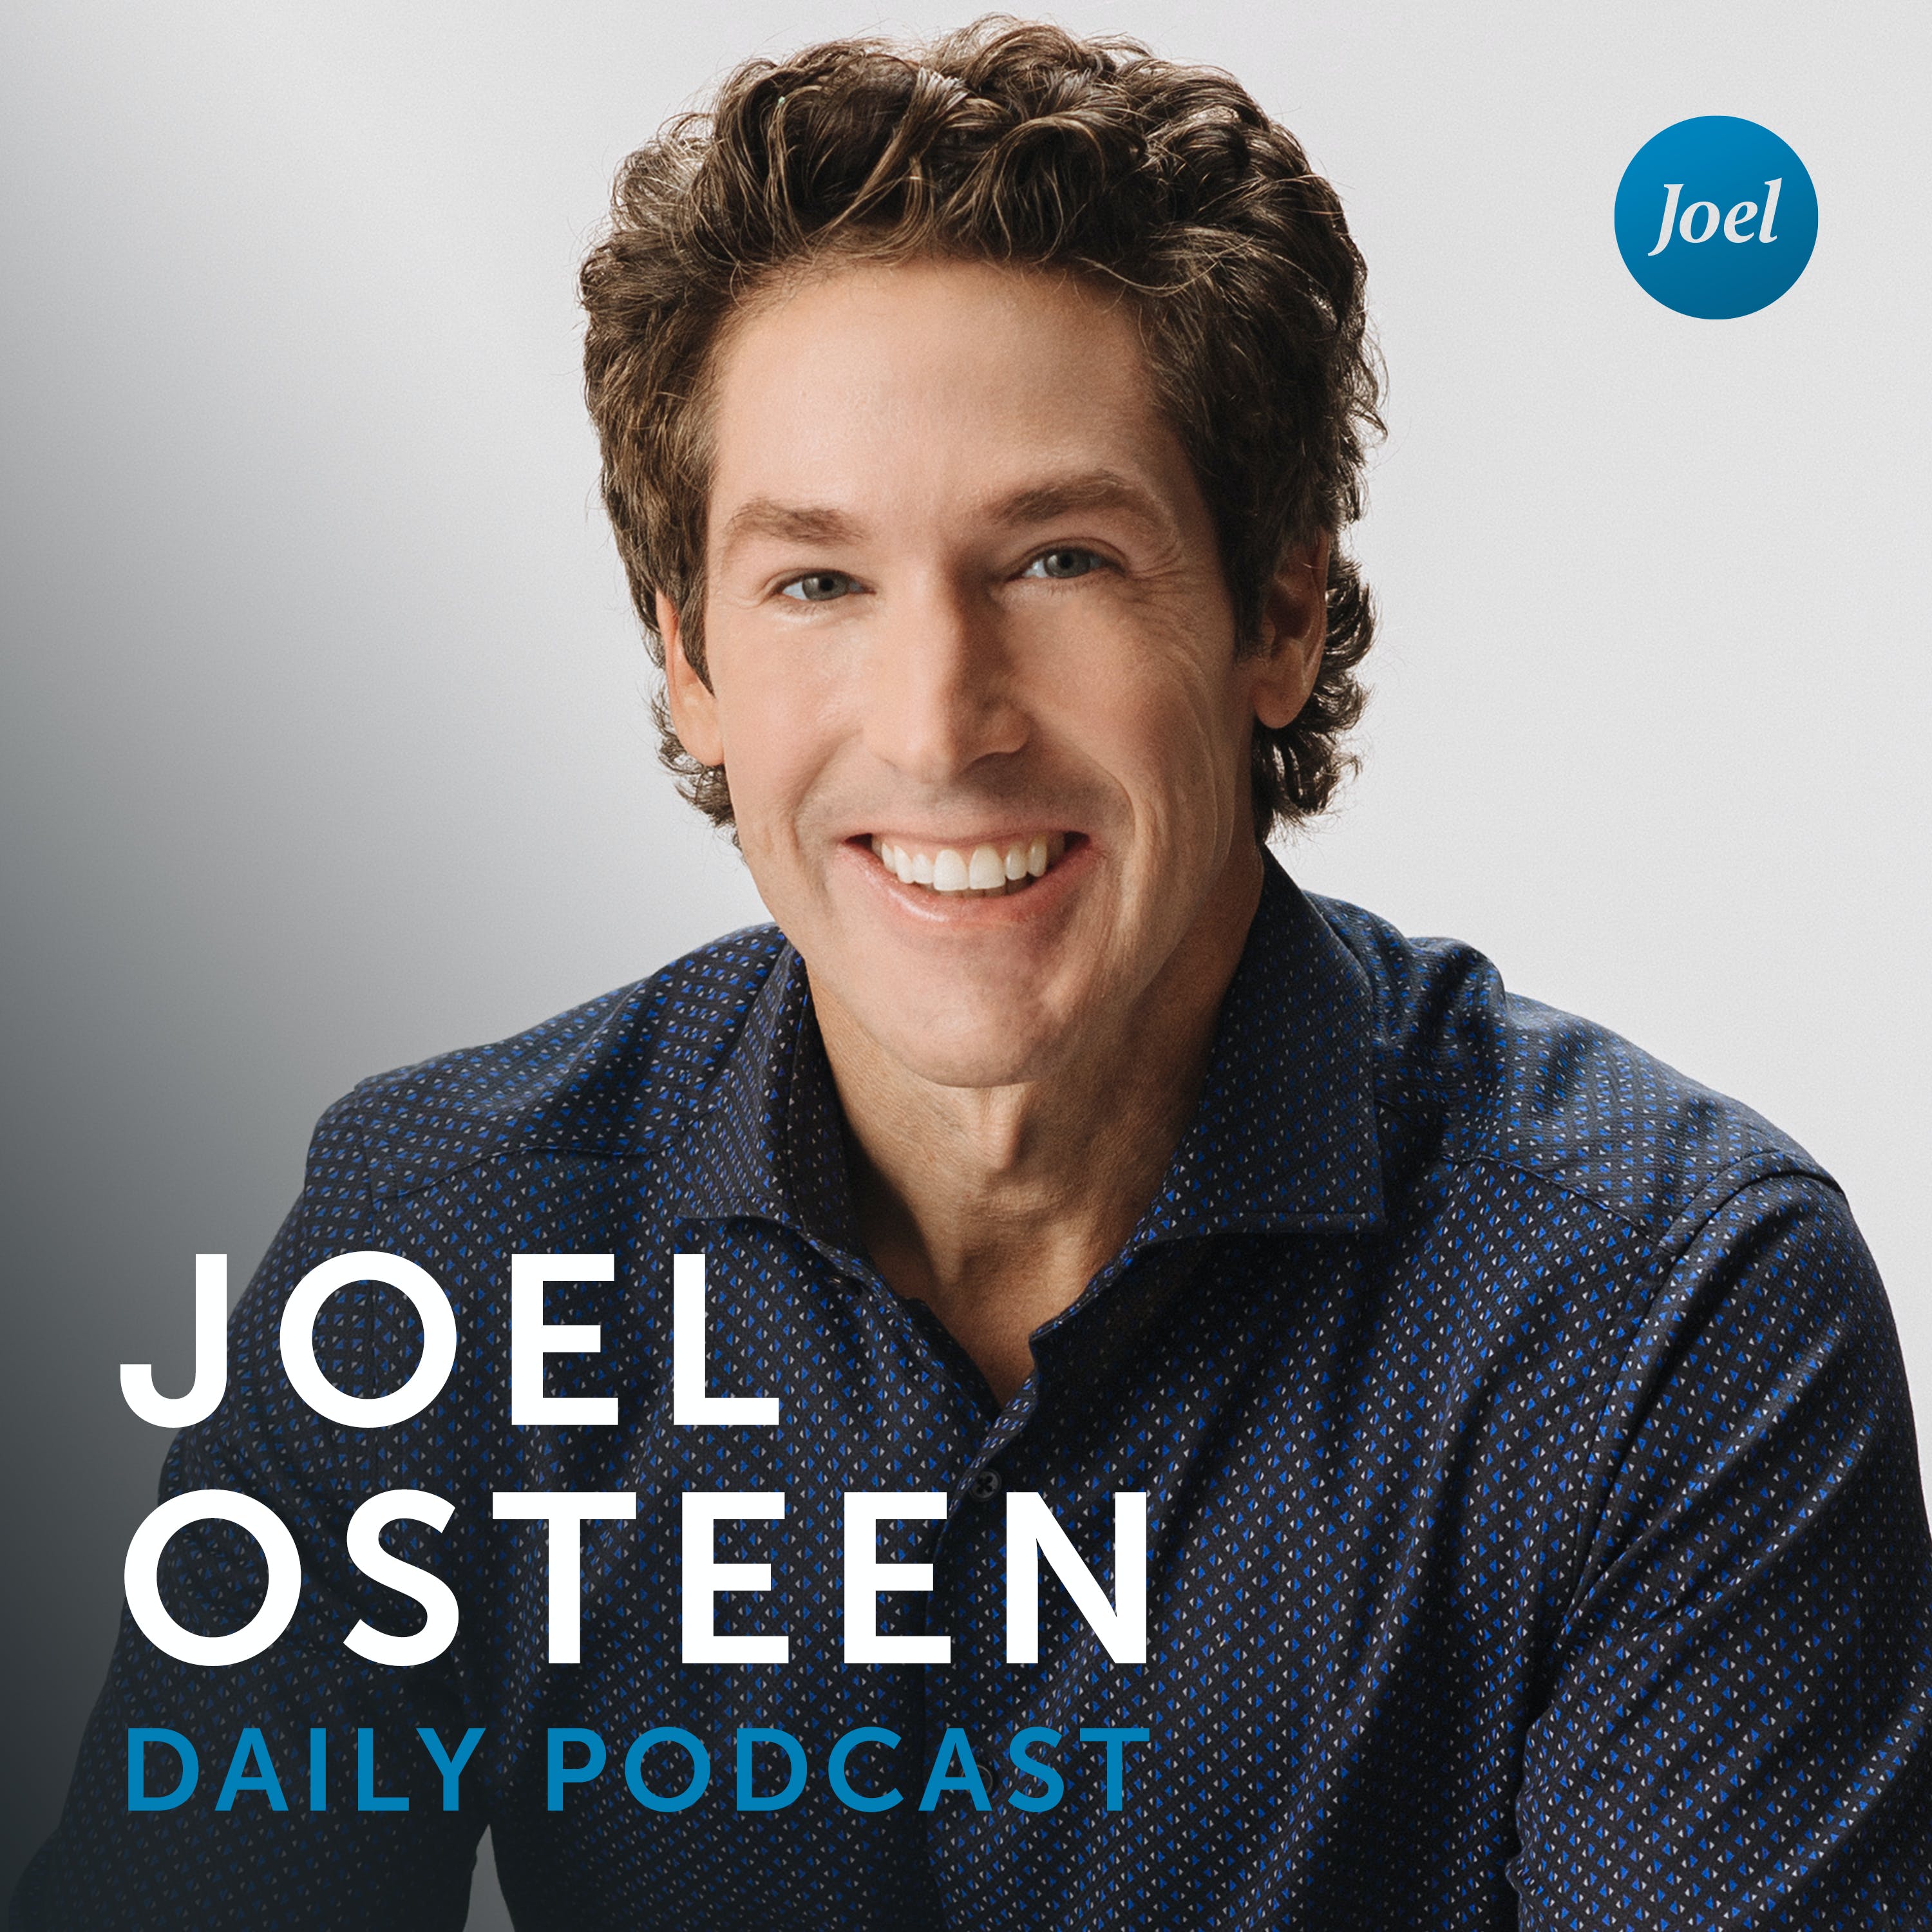 Your Time To Reign | Joel Osteen